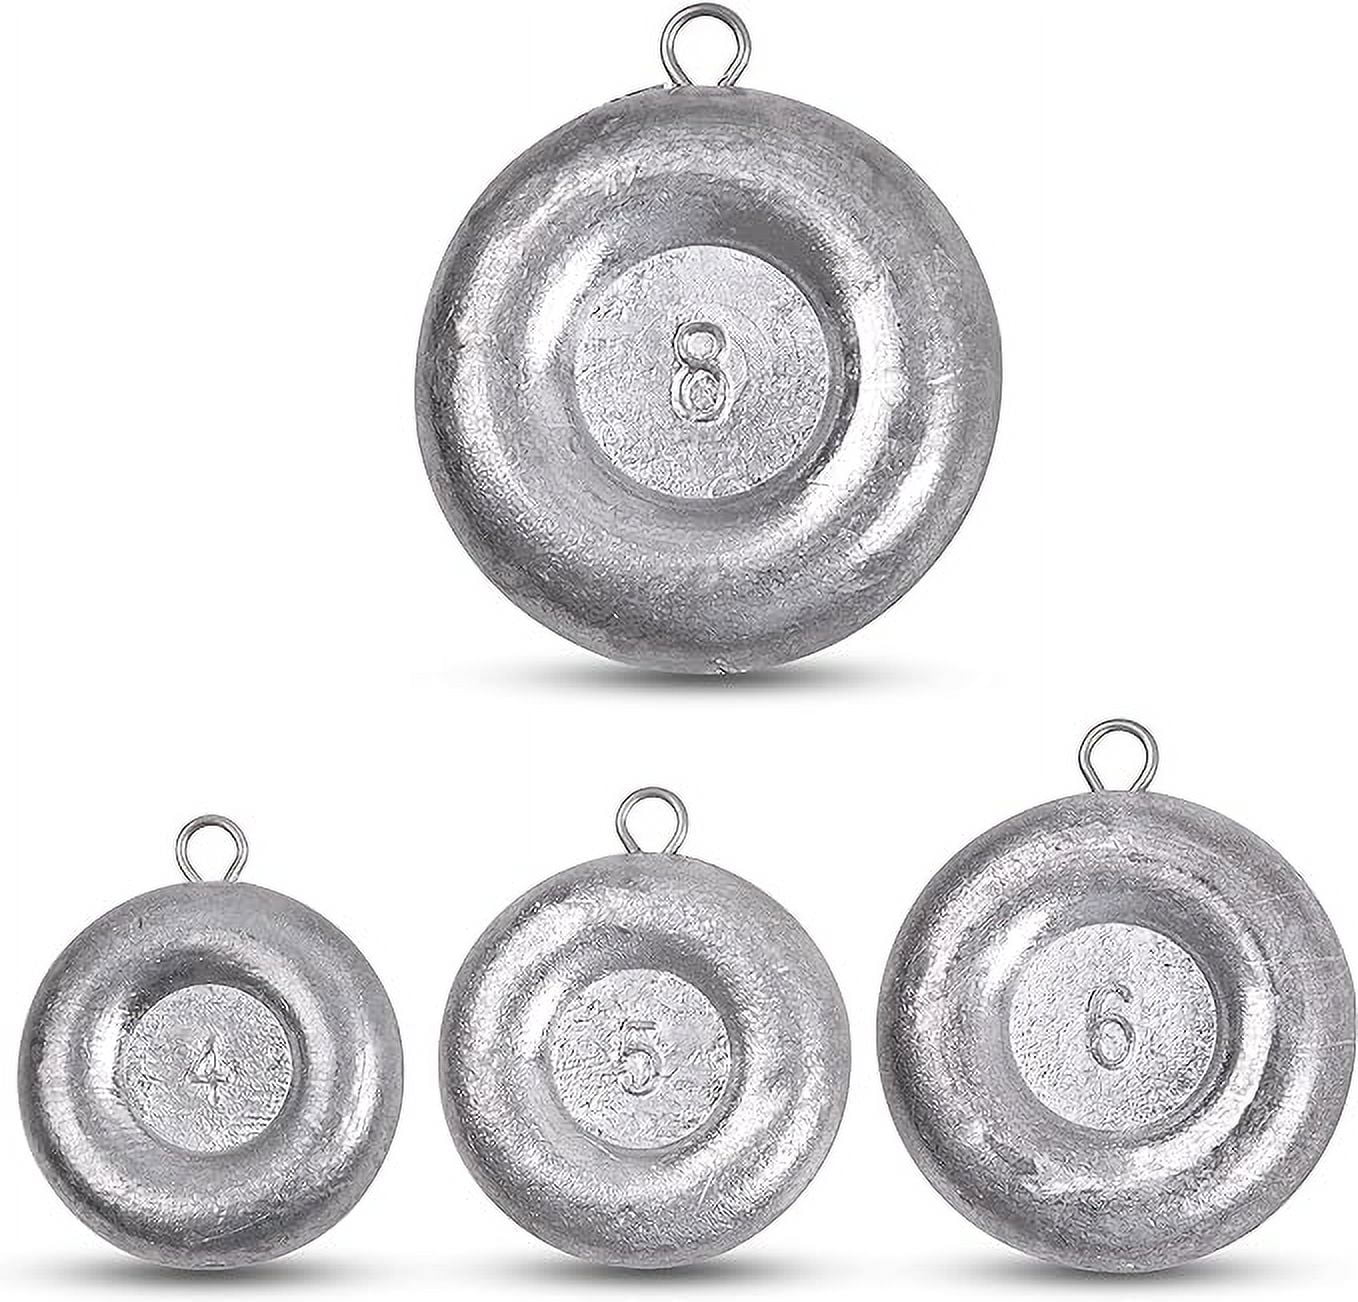 Danielson Bass Casting Sinkers Fishing Weight, 1/2 oz., 3-pack 